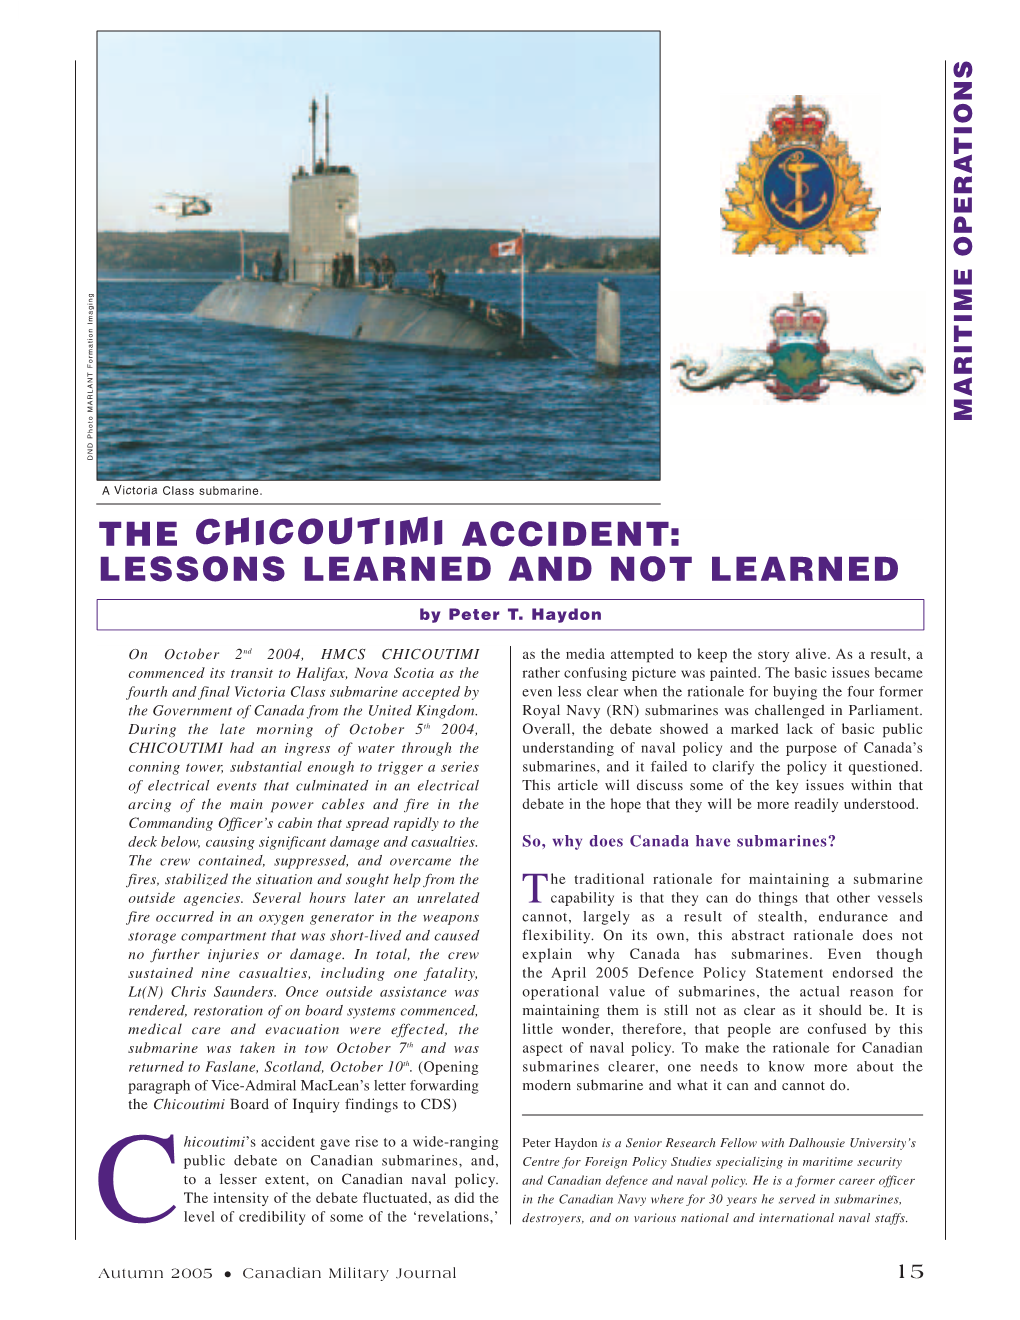 The Chicoutimi Accident: Lessons Learned and Not Learned